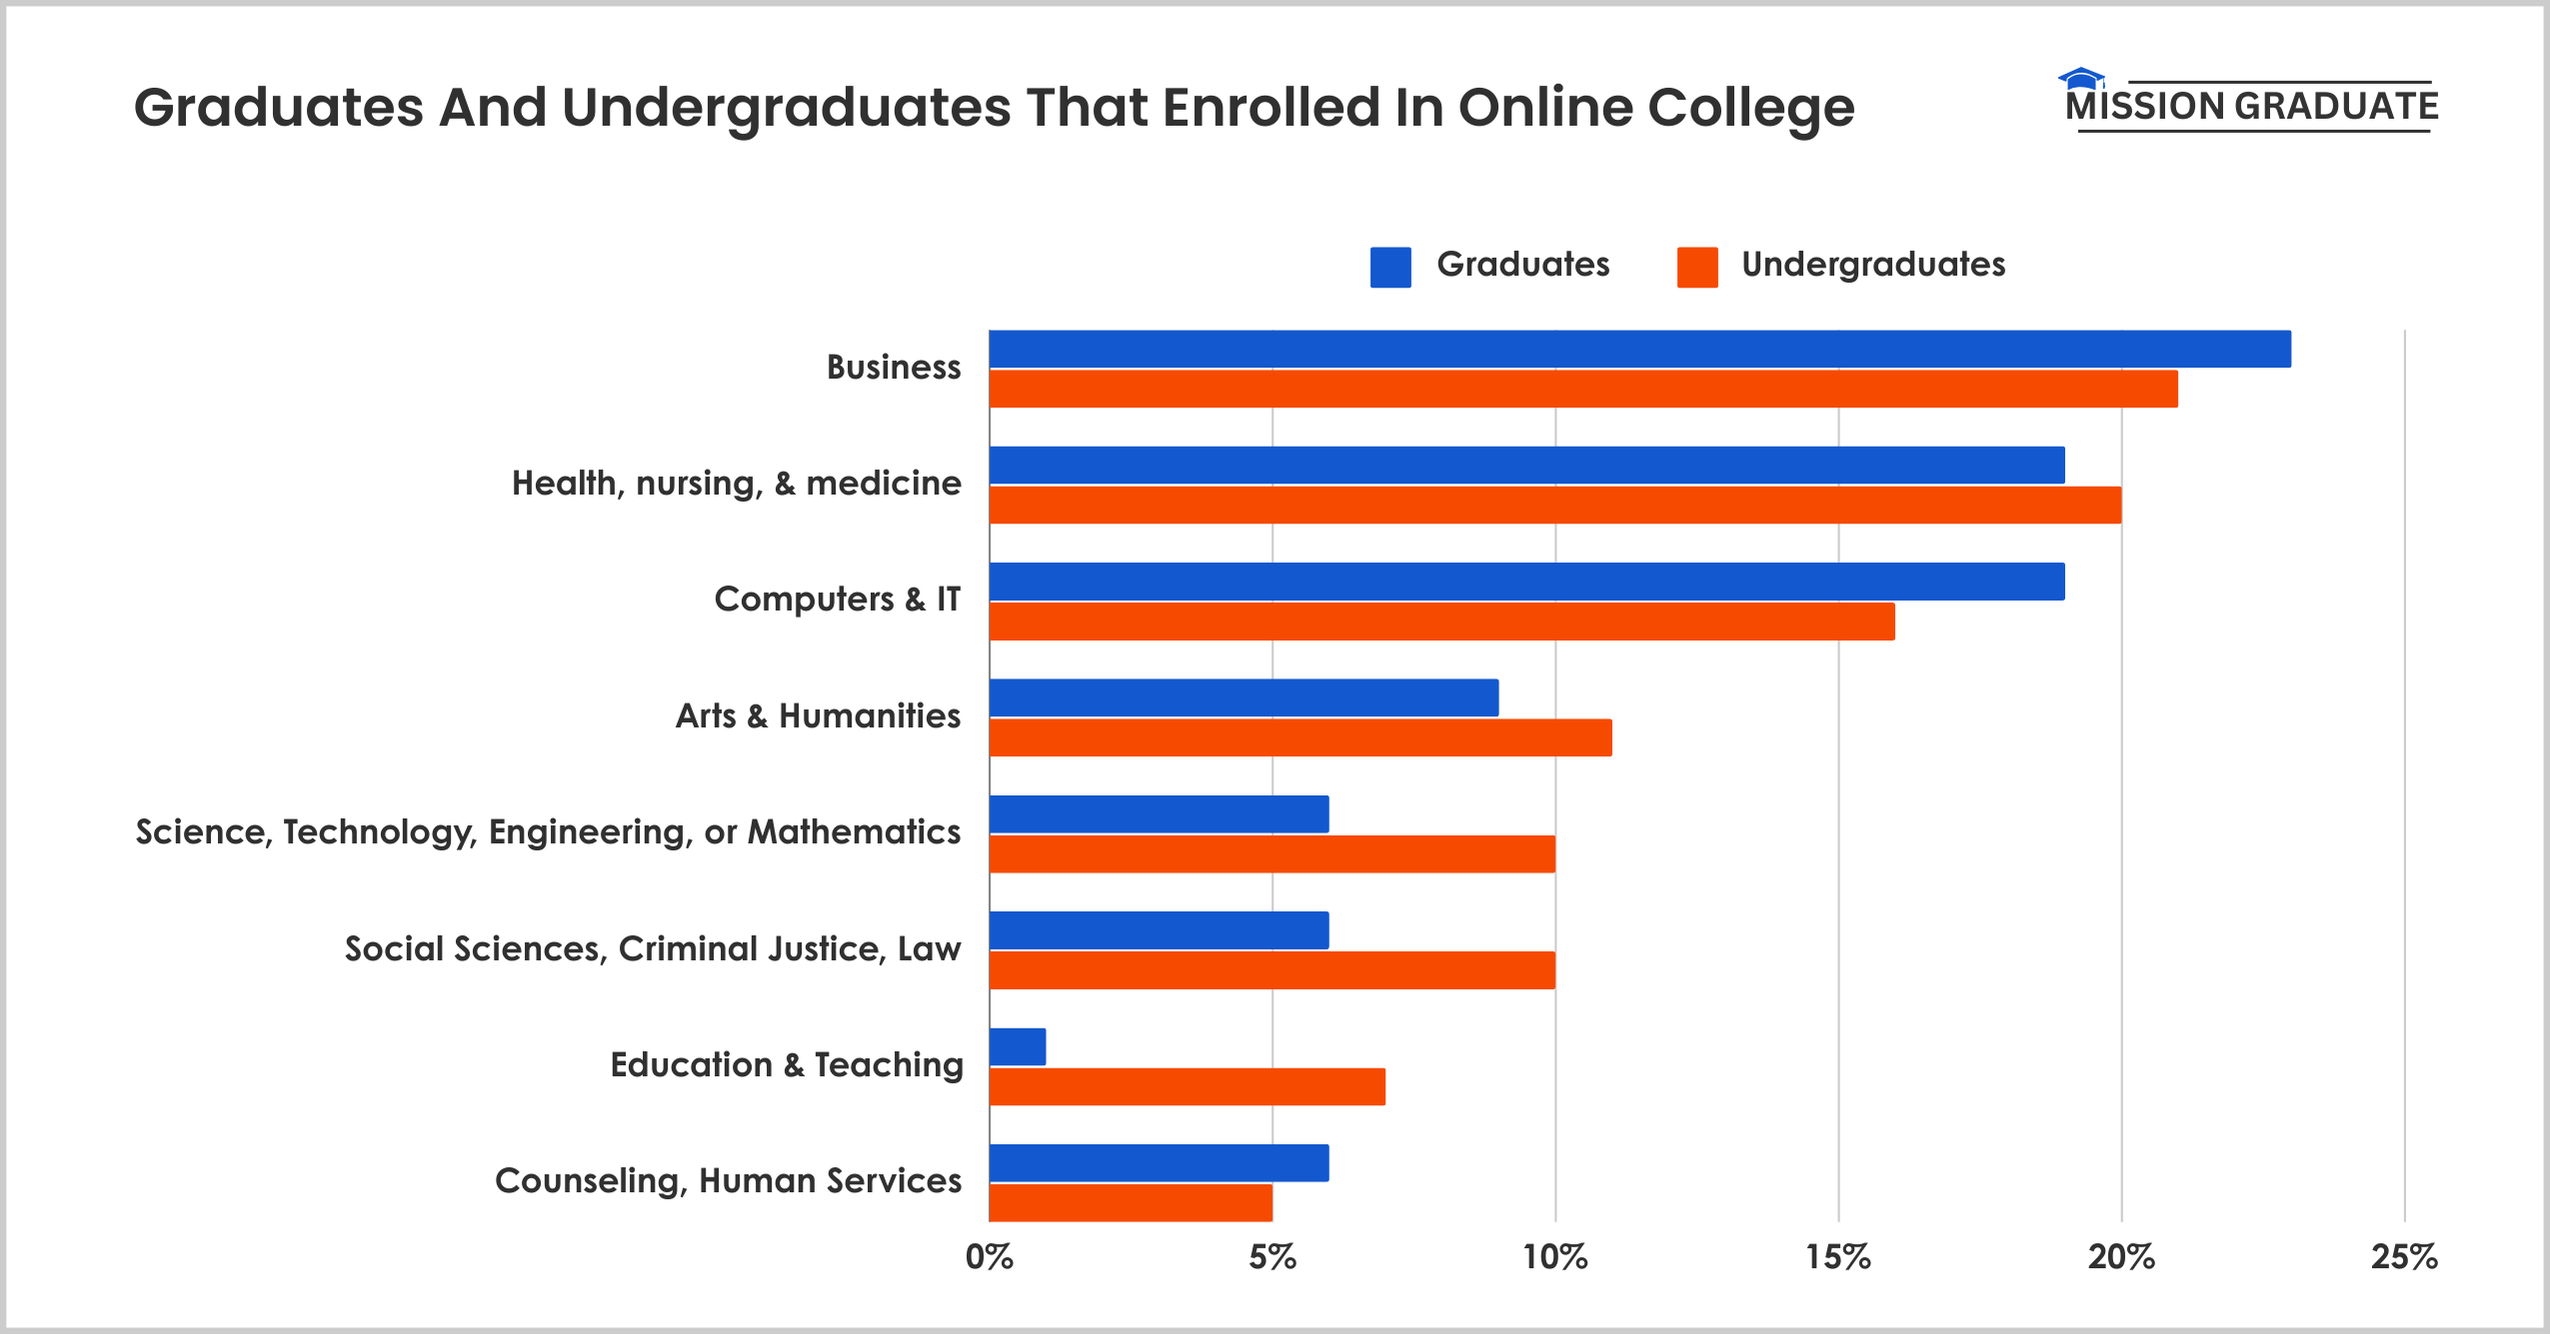 Graduates And Undergraduates That Enrolled In Online College